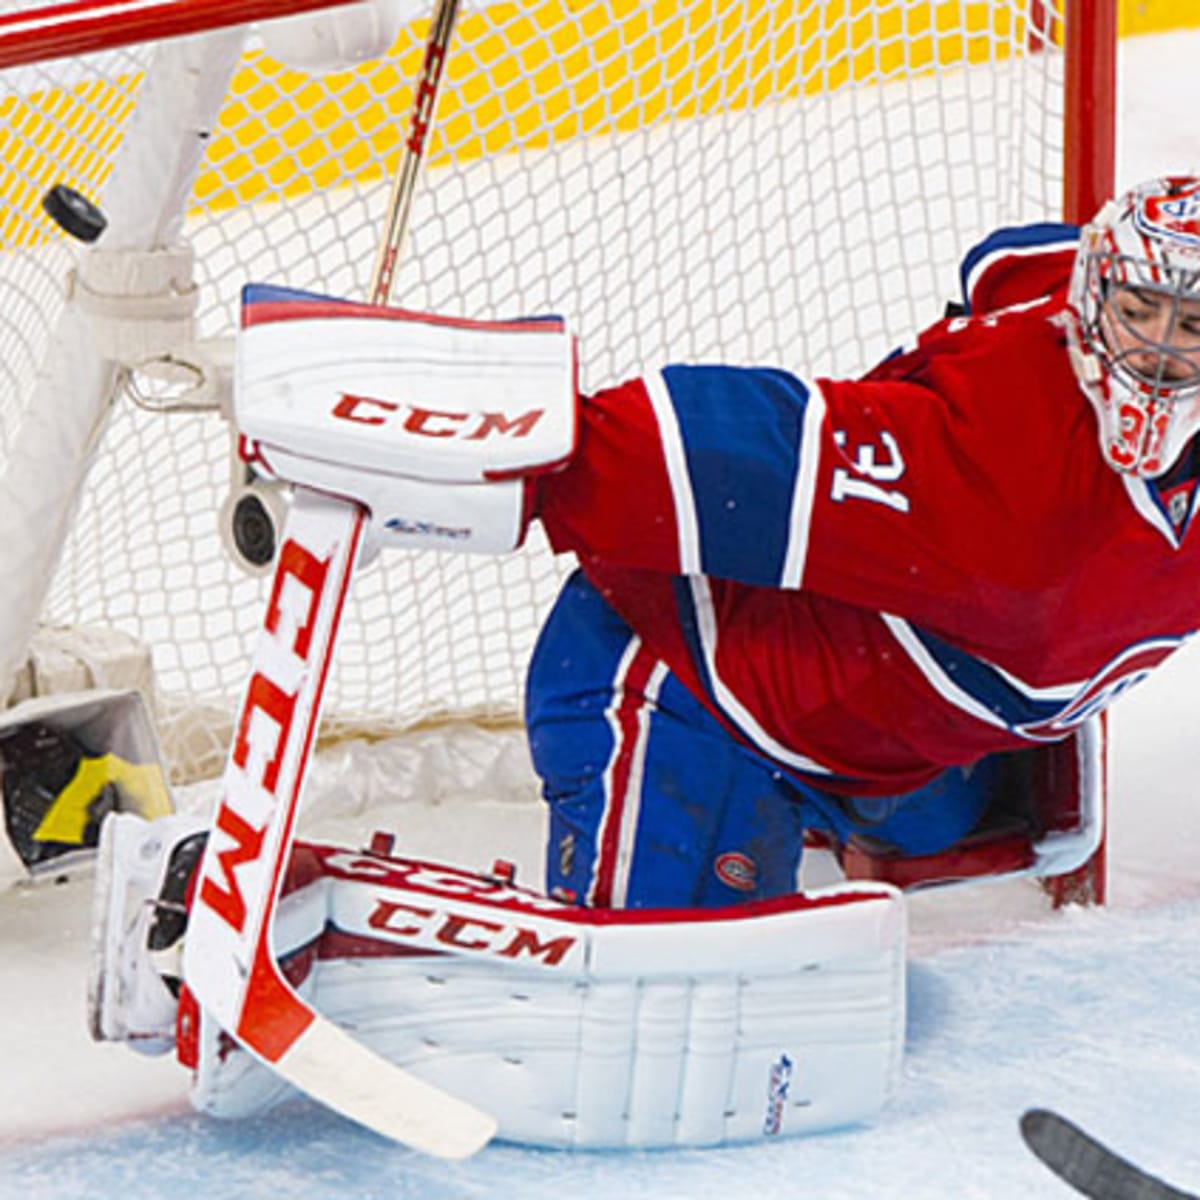 Canadiens goalie Carey Price a standout even at 14, says his